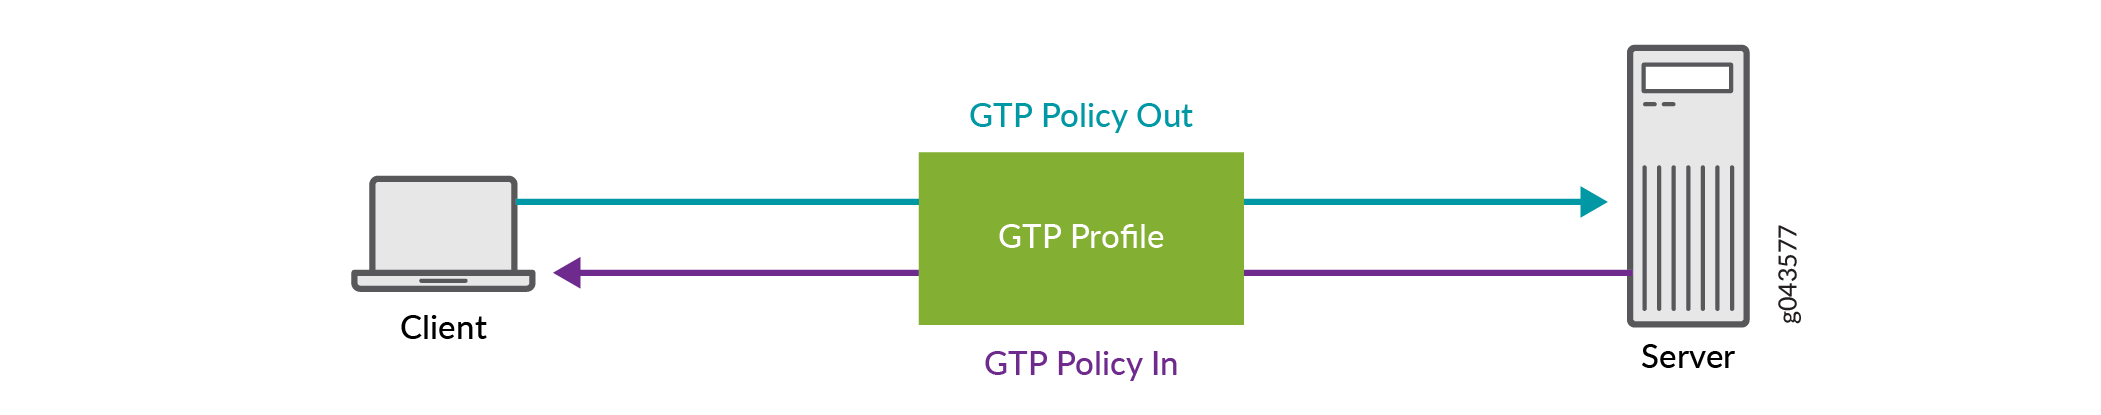 GTP Profile for incoming and outgoing GTP messages